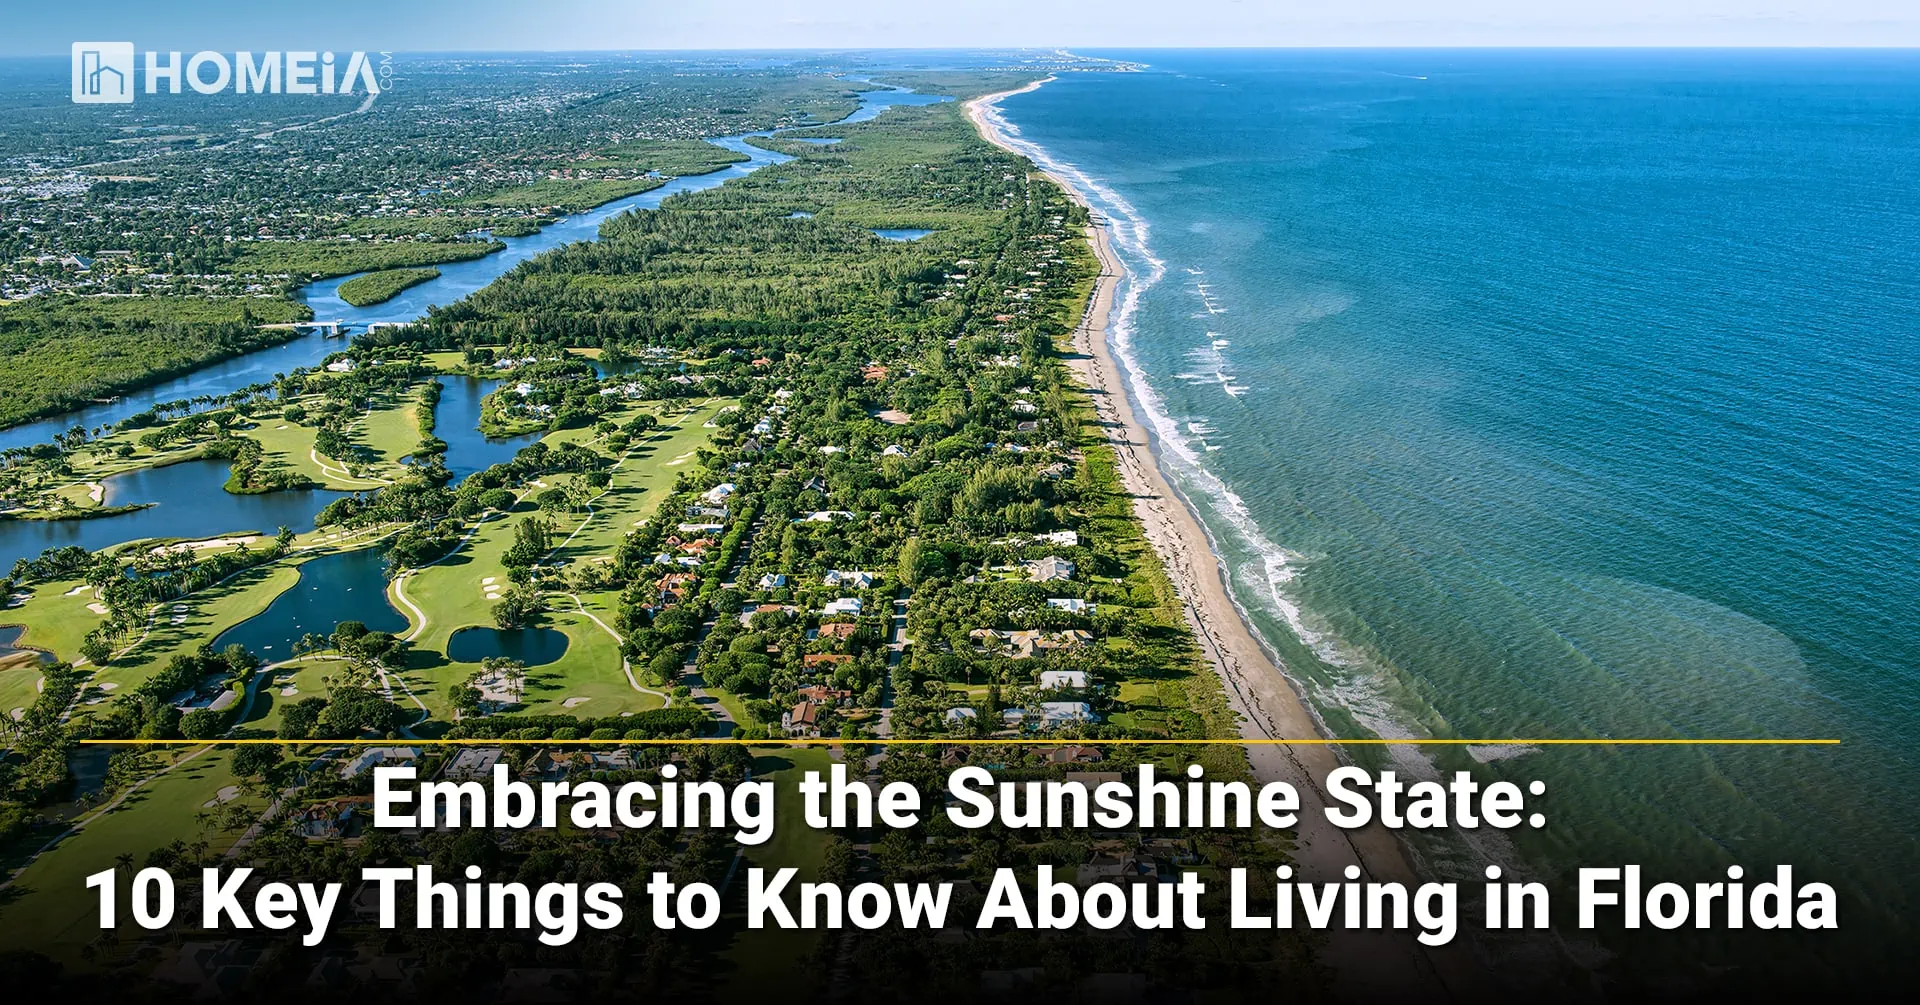 Embracing the Sunshine State: 10 Key Things to Know About Living in Florida